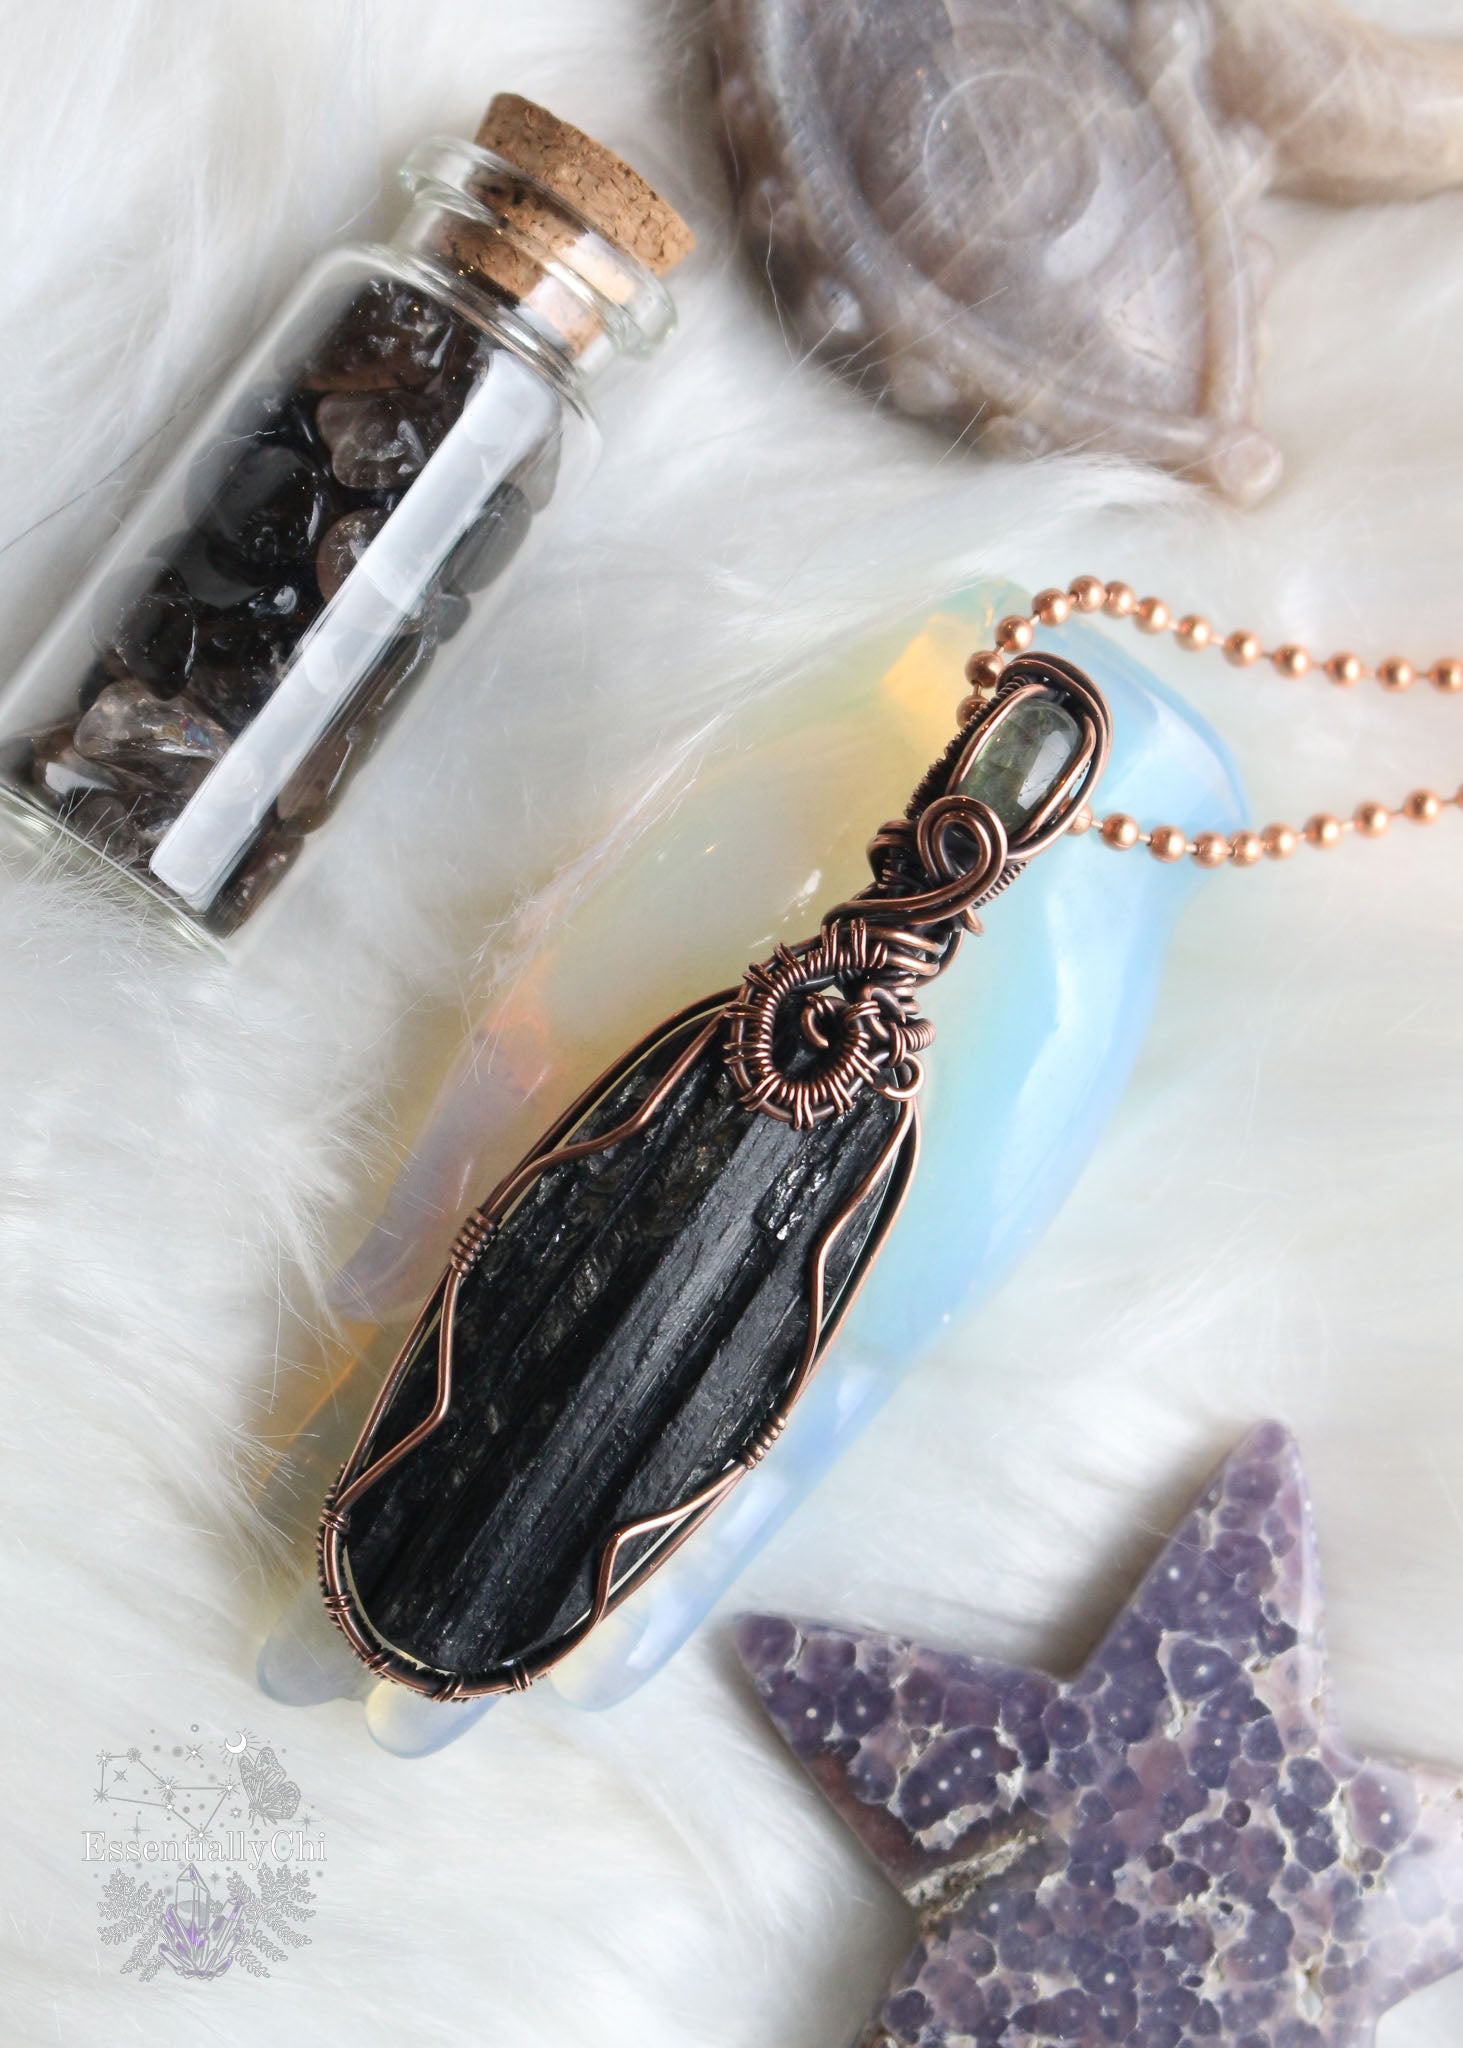 A captivating Black Tourmaline and Labradorite Wire Wrapped Necklace – a synergy of protection and mysticism. The raw-faced Black Tourmaline, guardian of grounding energy, meets the enchanting Labradorite with its green-yellow flash, enhancing intuition and spiritual connection. Elevate your style and energy with this handcrafted gem, designed for those who seek both protection and magic. Pendant is 2.9" in length.